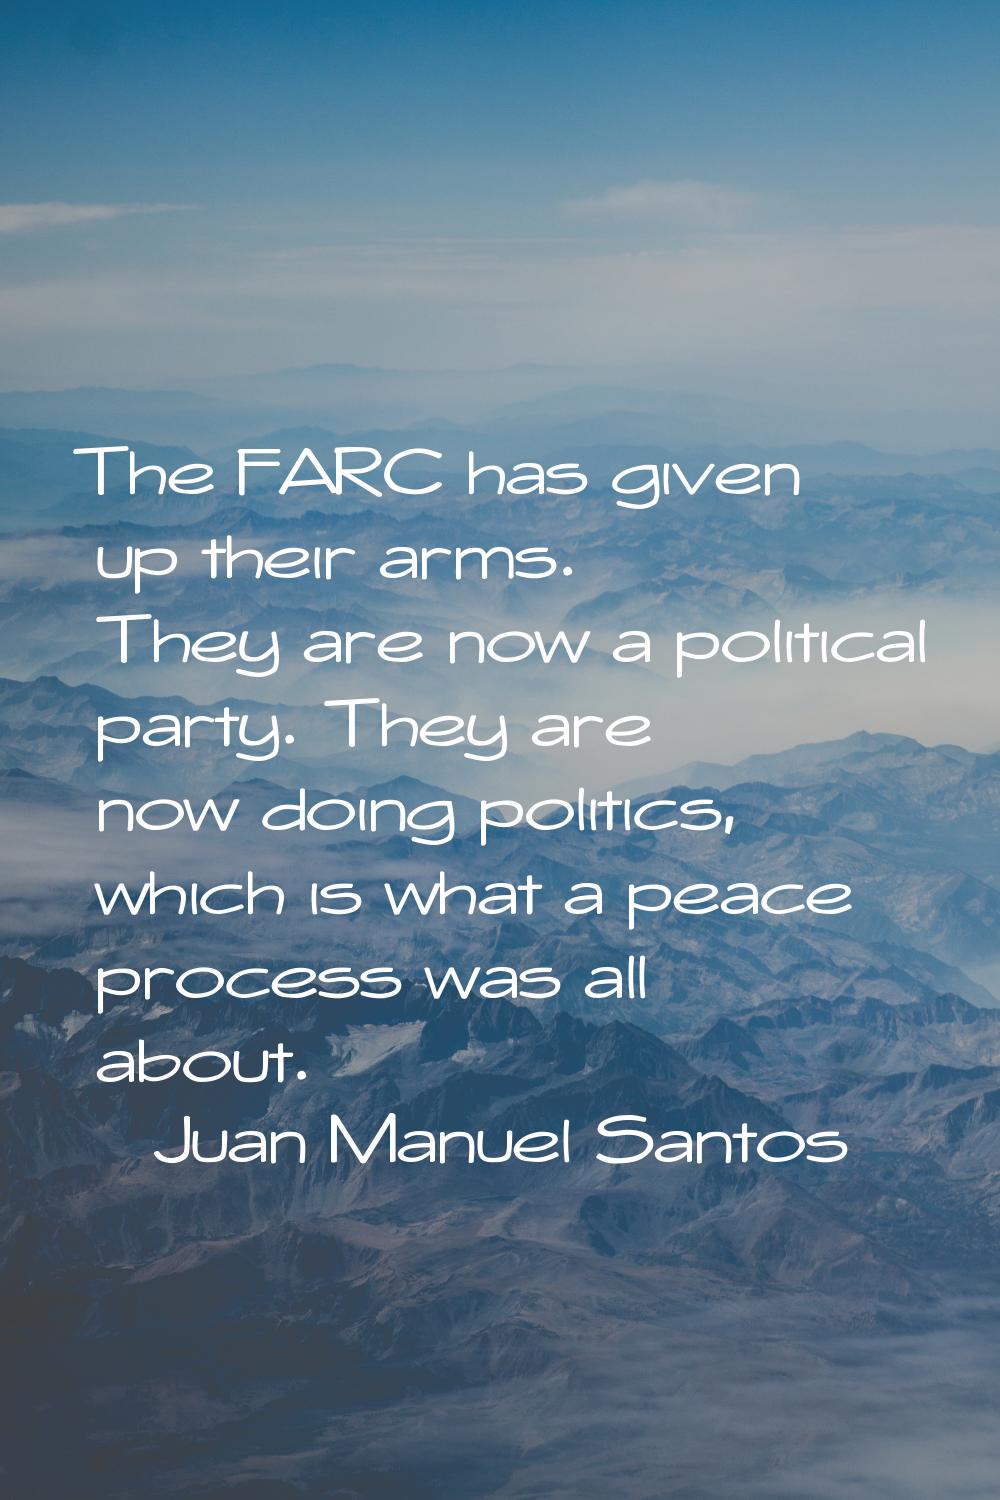 The FARC has given up their arms. They are now a political party. They are now doing politics, whic